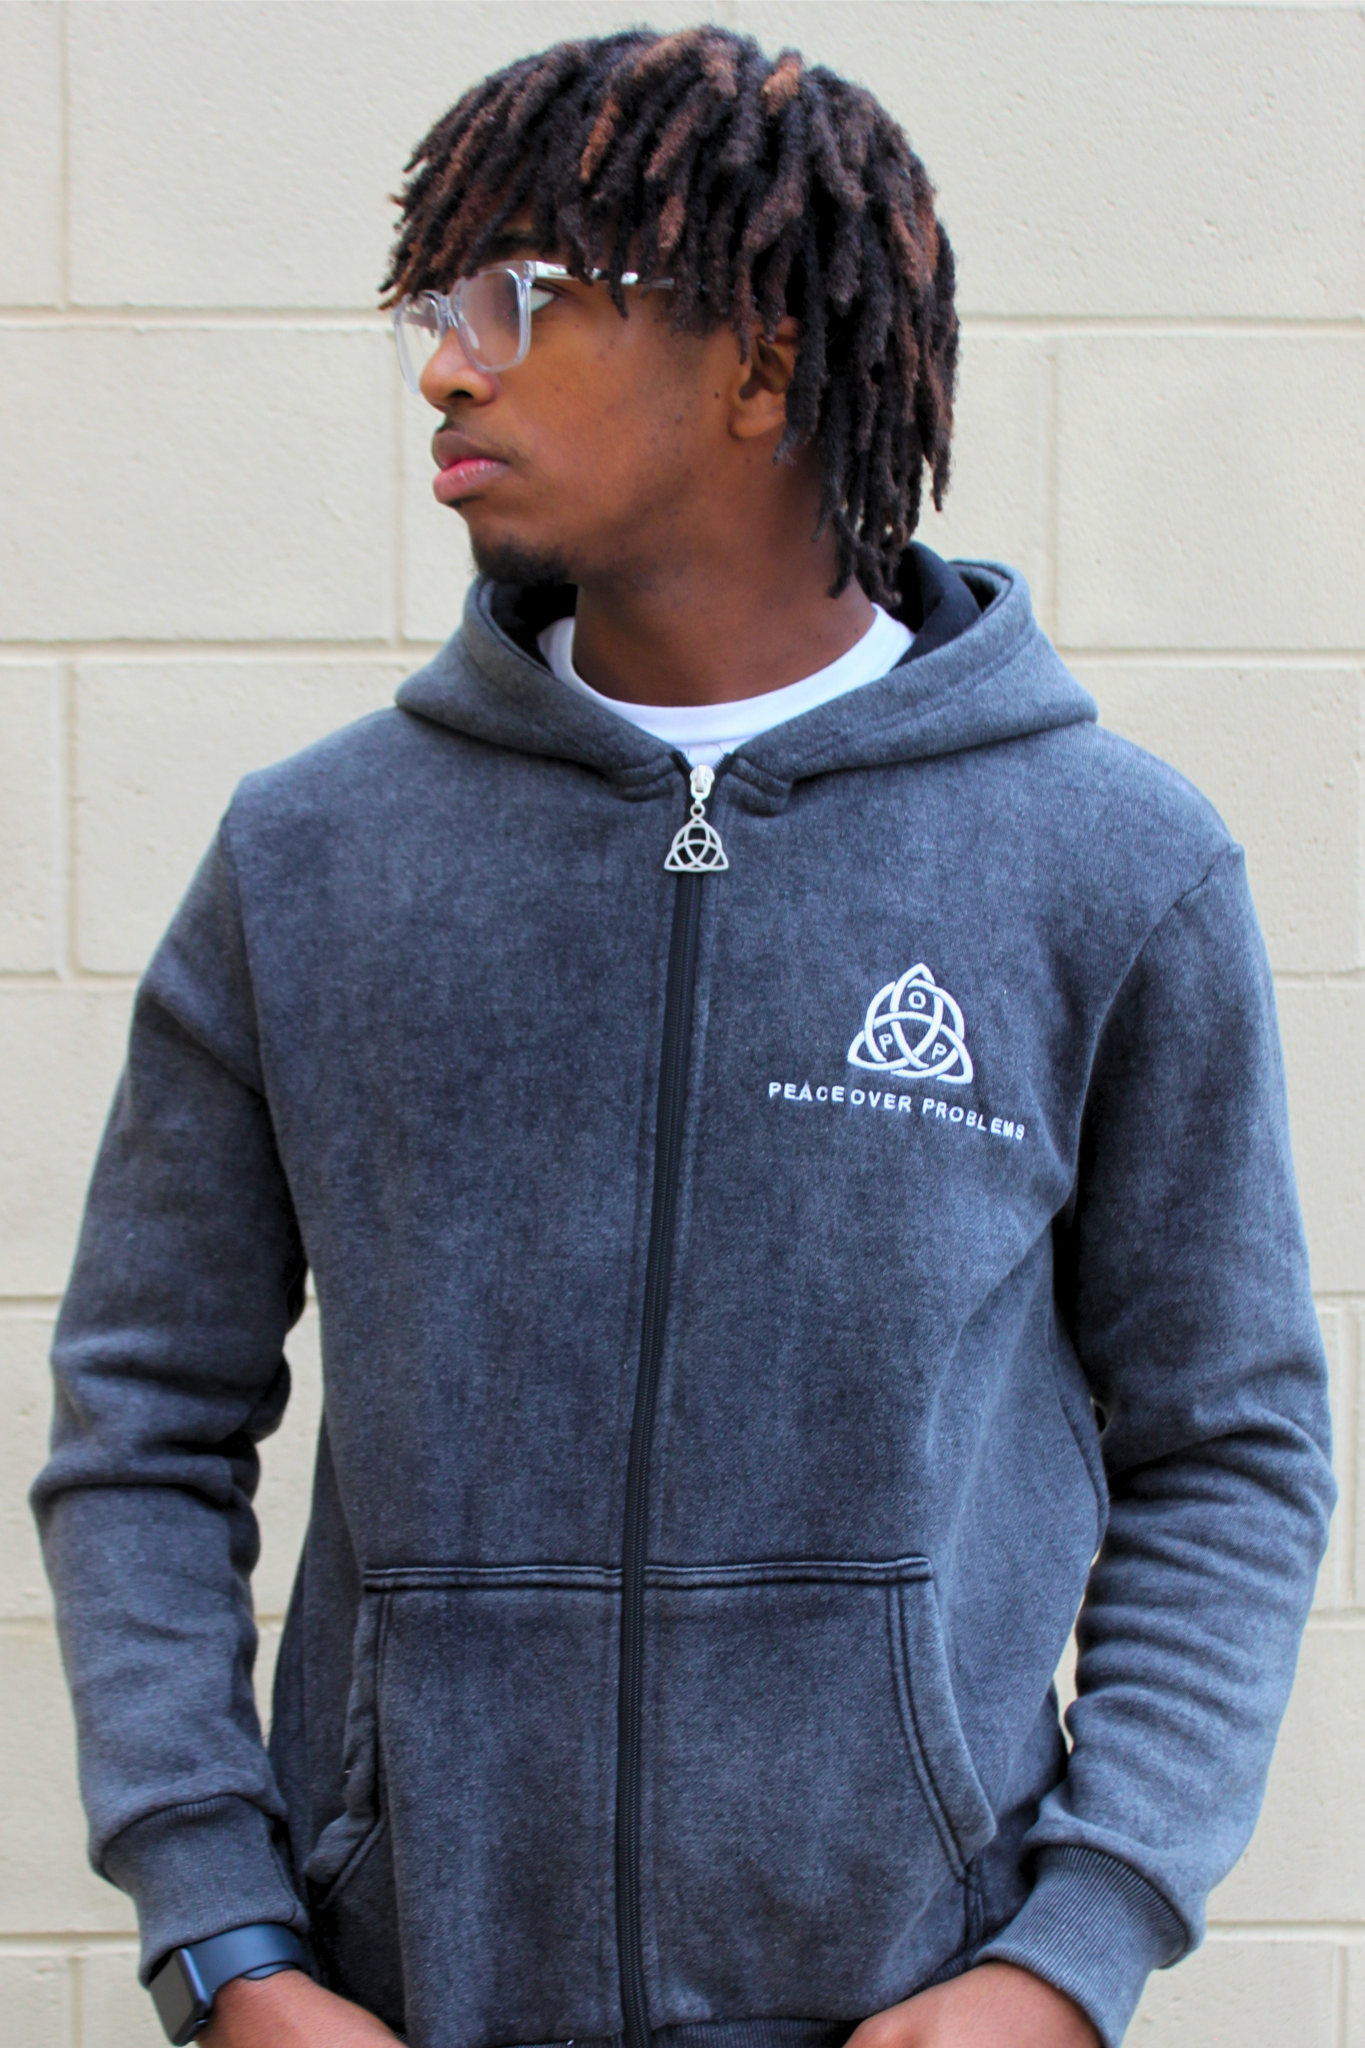 *PRE ORDER* "PeaceOverProblems" (Charcoal Black) Zip-Up Hoodie (TRUE TO SIZE)